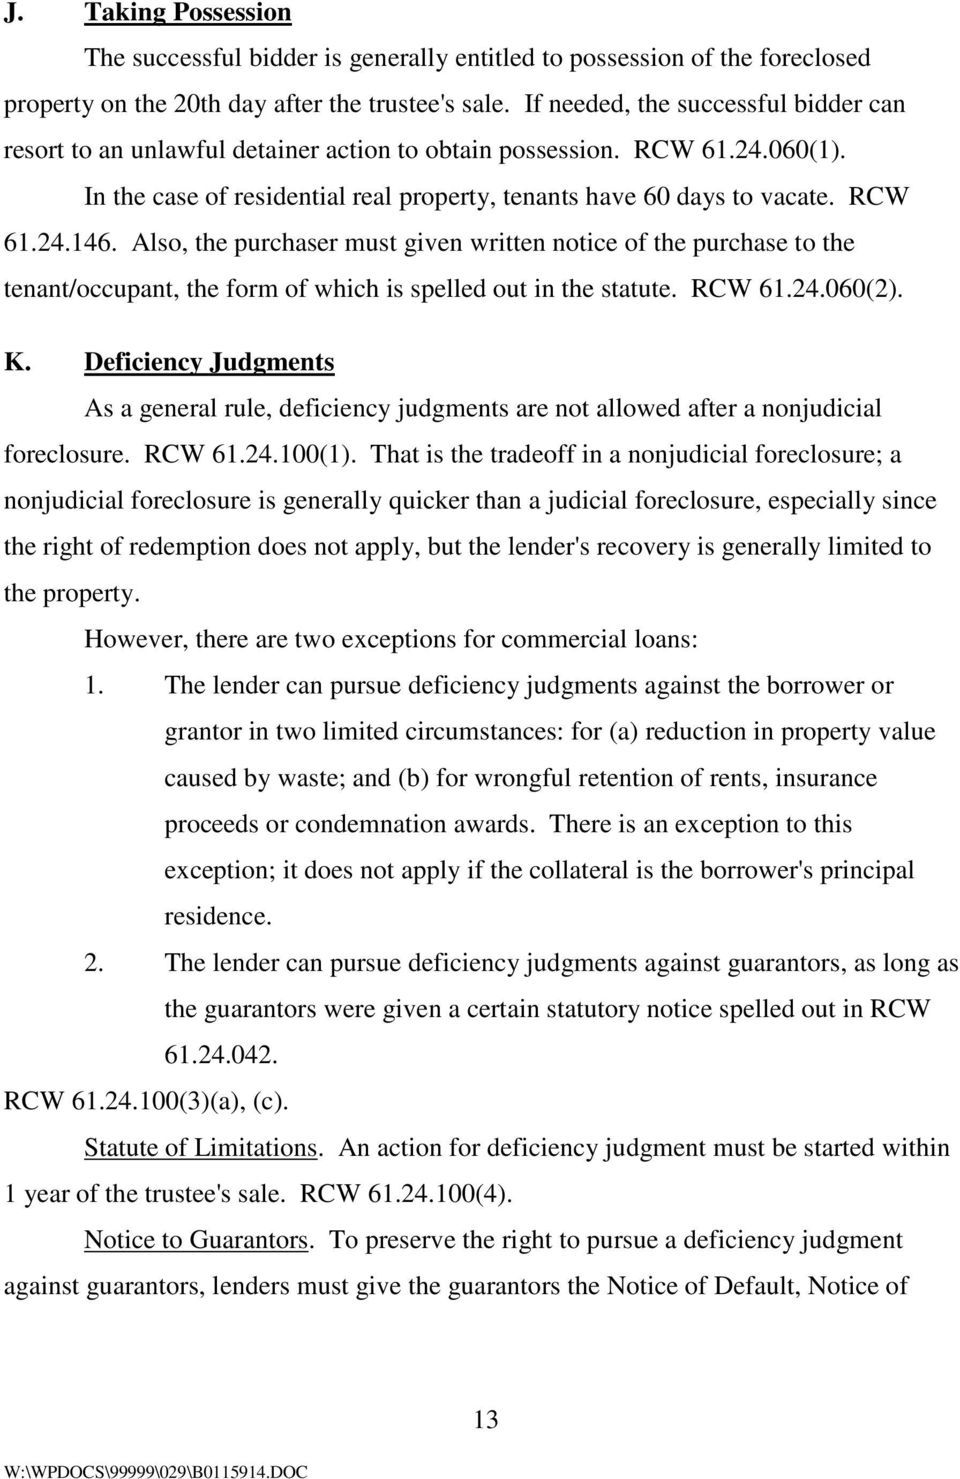 Also, the purchaser must given written notice of the purchase to the tenant/occupant, the form of which is spelled out in the statute. RCW 61.24.060(2). K.